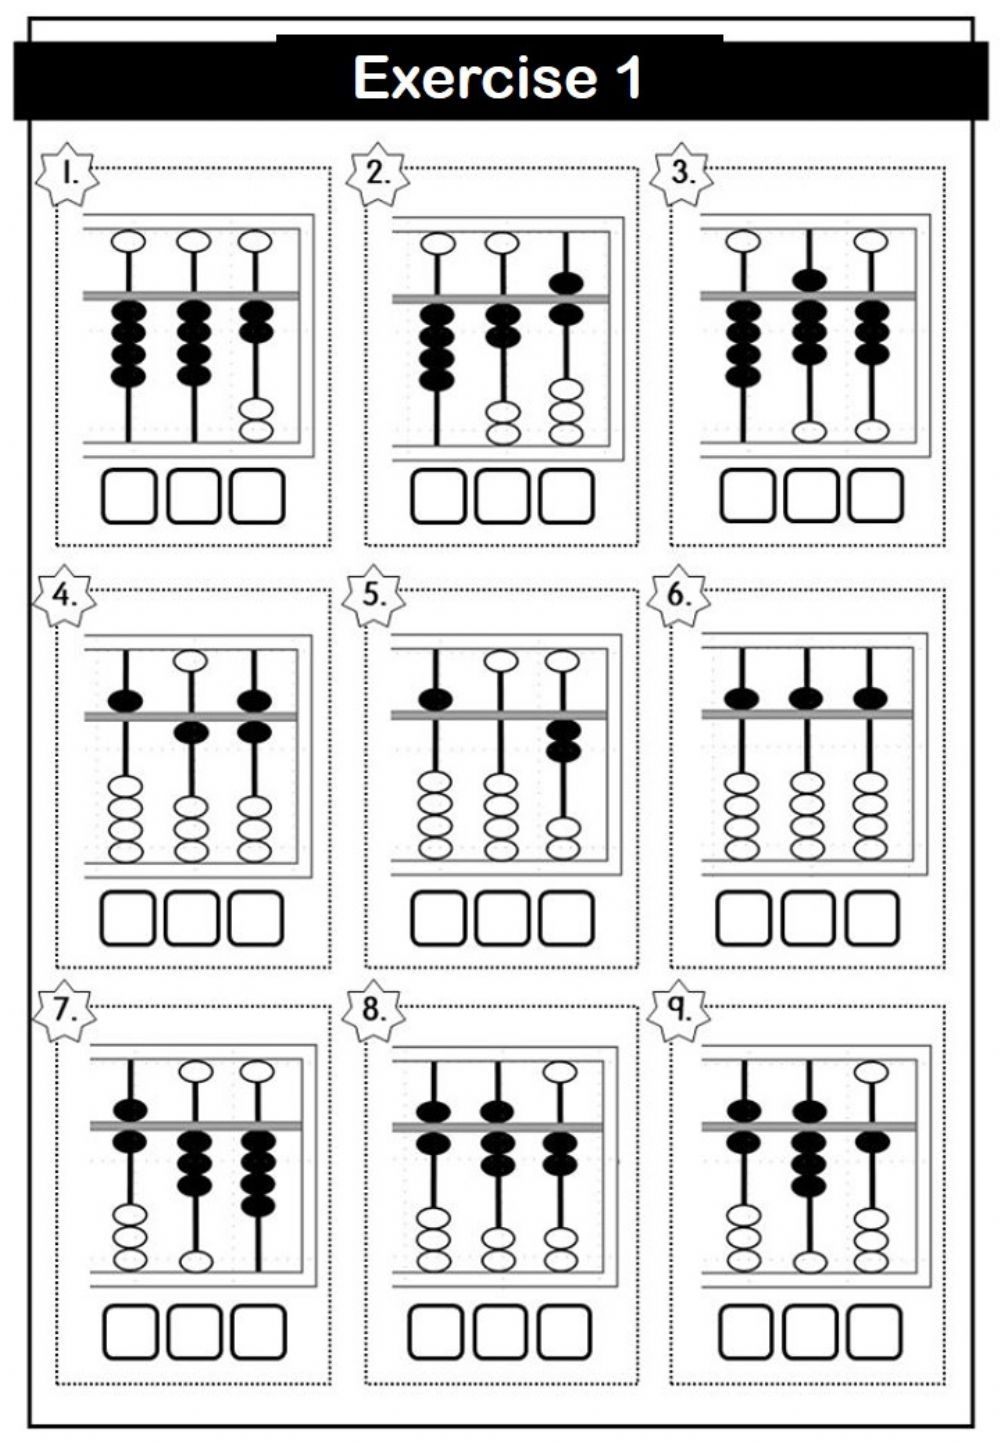 Abacus Online Worksheet For Year 2 You Can Do The Exercises Online Or Download The Worksheet As Pdf Abacus Math Math Worksheets Abacus - Free Printable Abacus Worksheets